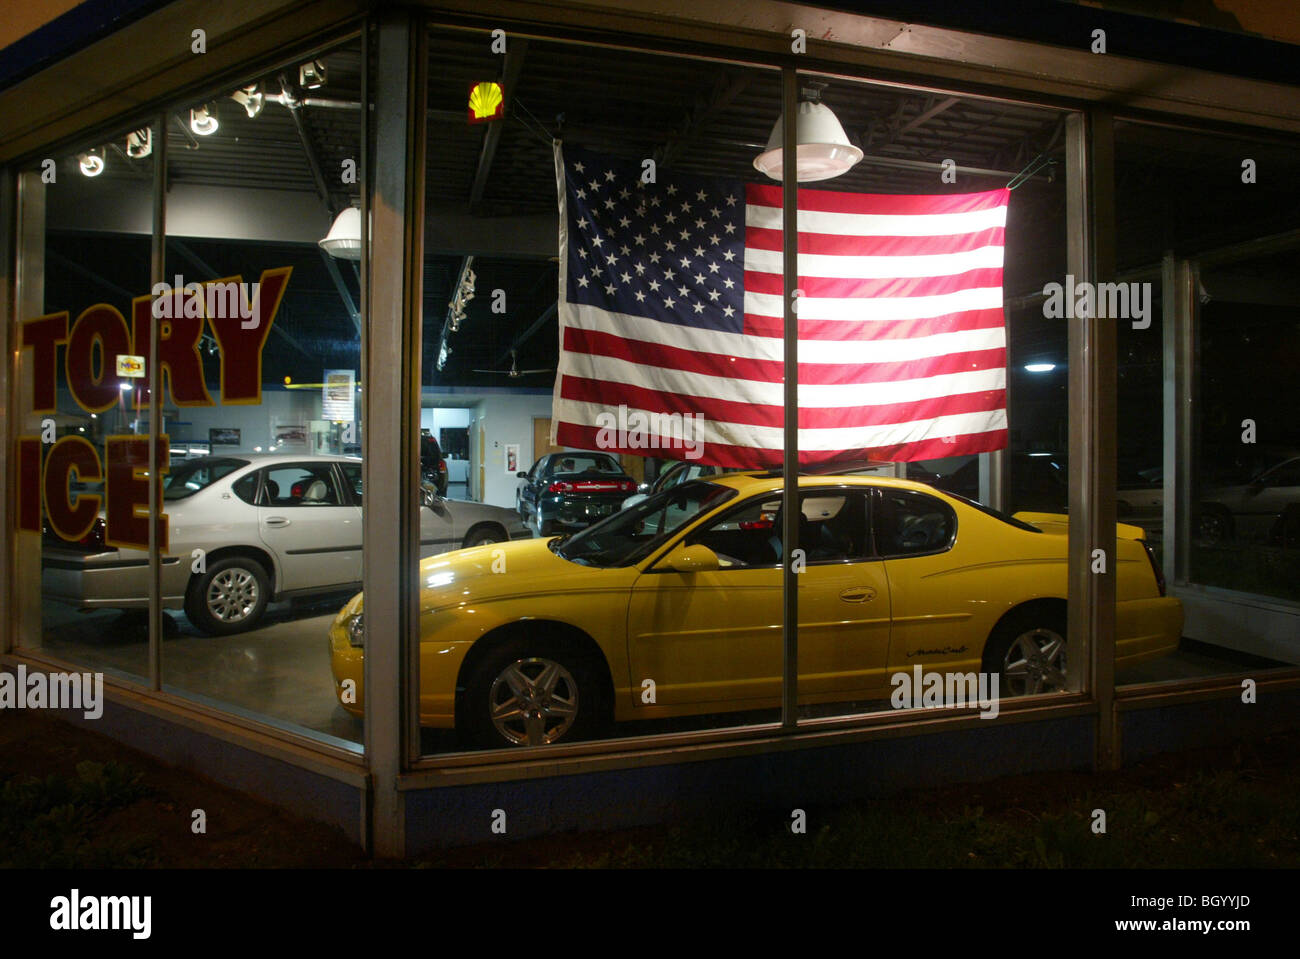 The American flag is used to help sell cars in Lawrenceburg, Indiana. night southern indiana ohio river town Stock Photo